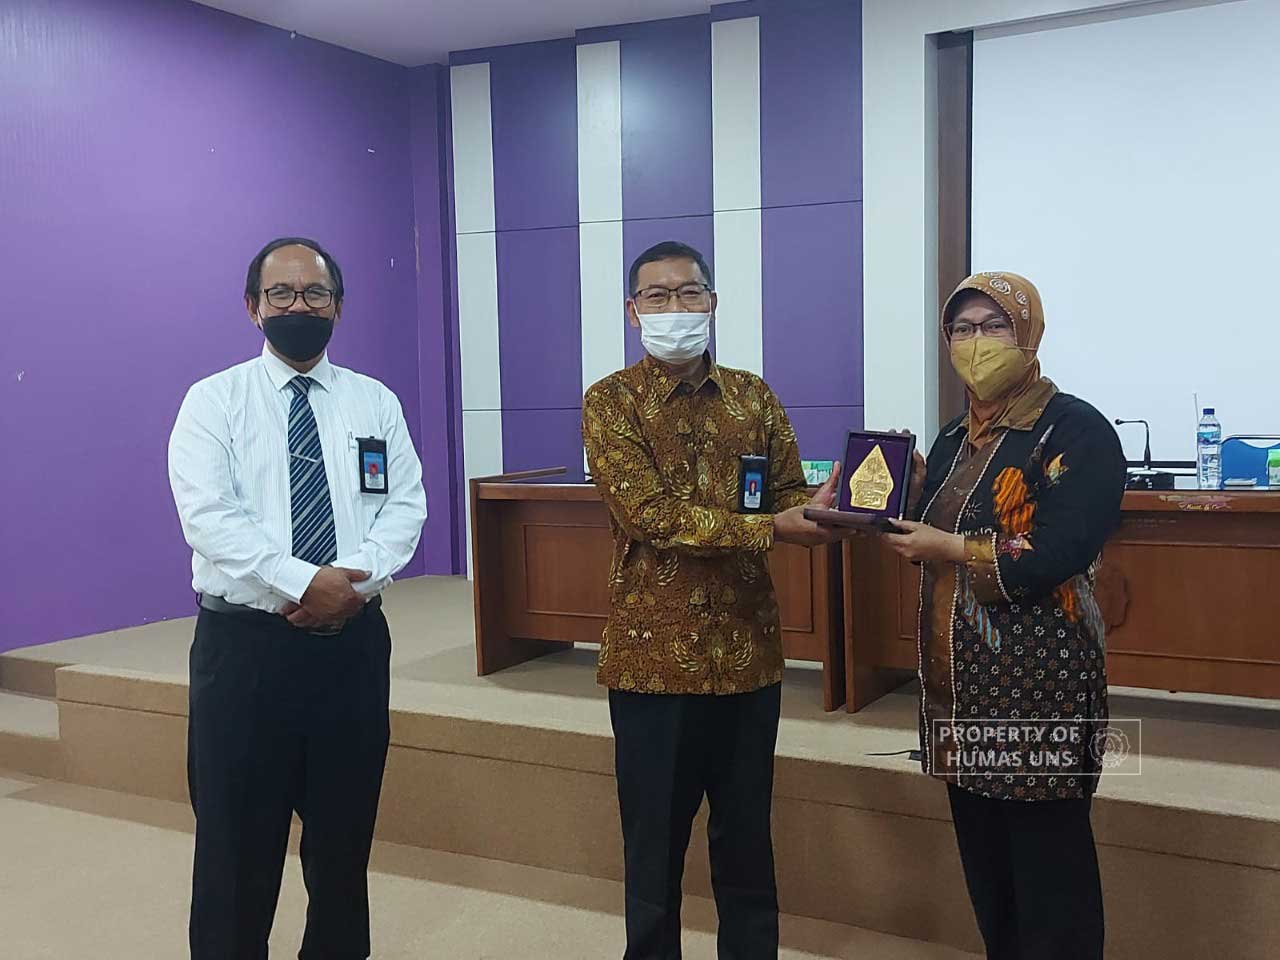 UPM FKIP UNS Welcomed a Visit from Faculty of Literature Universitas Negeri Malang